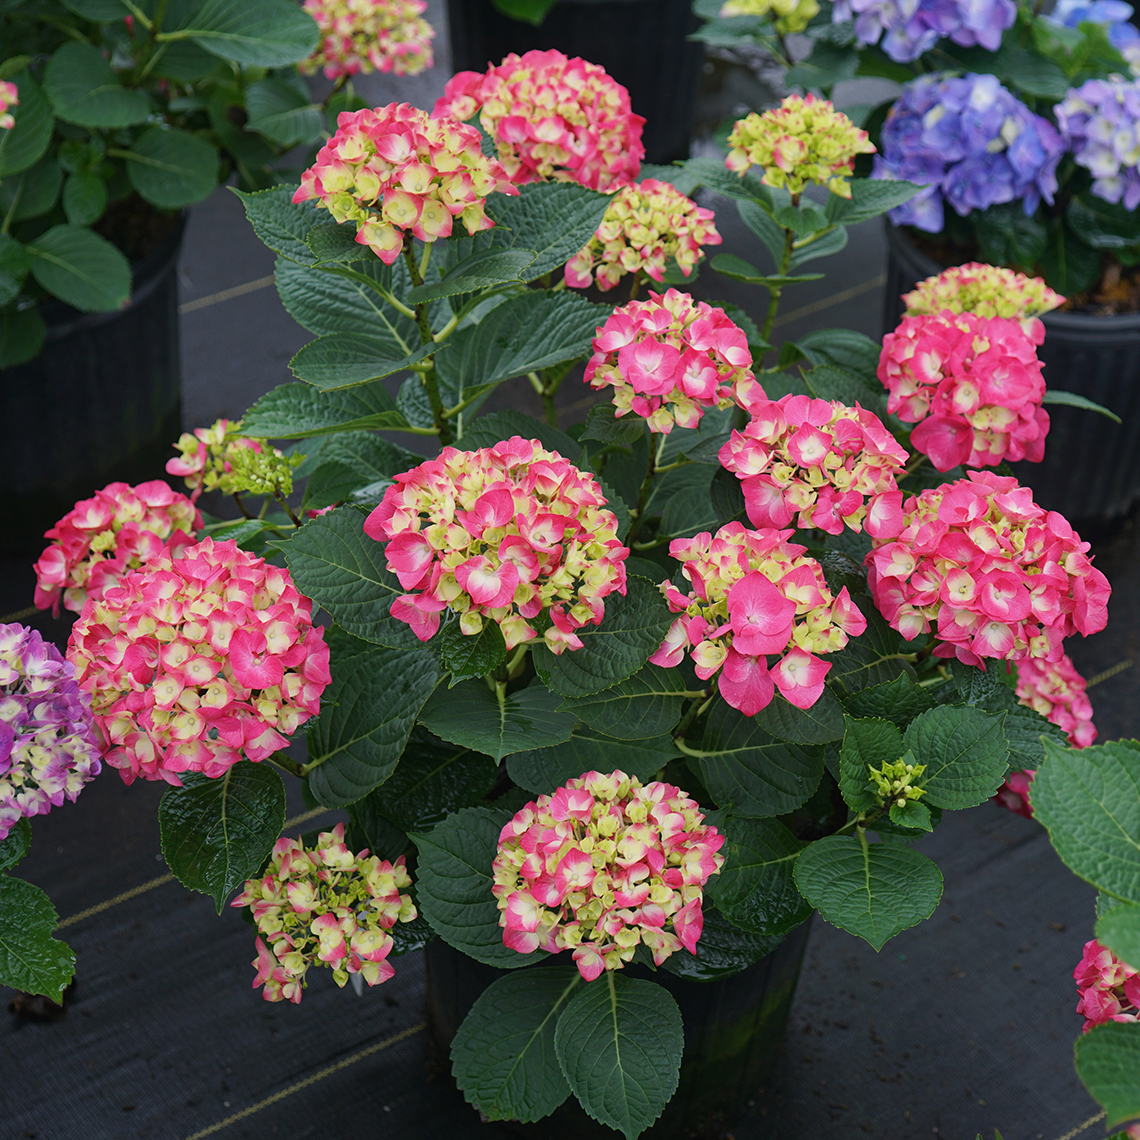 Wee Bit Giddy hydrangea covered in large pink mophead flowers